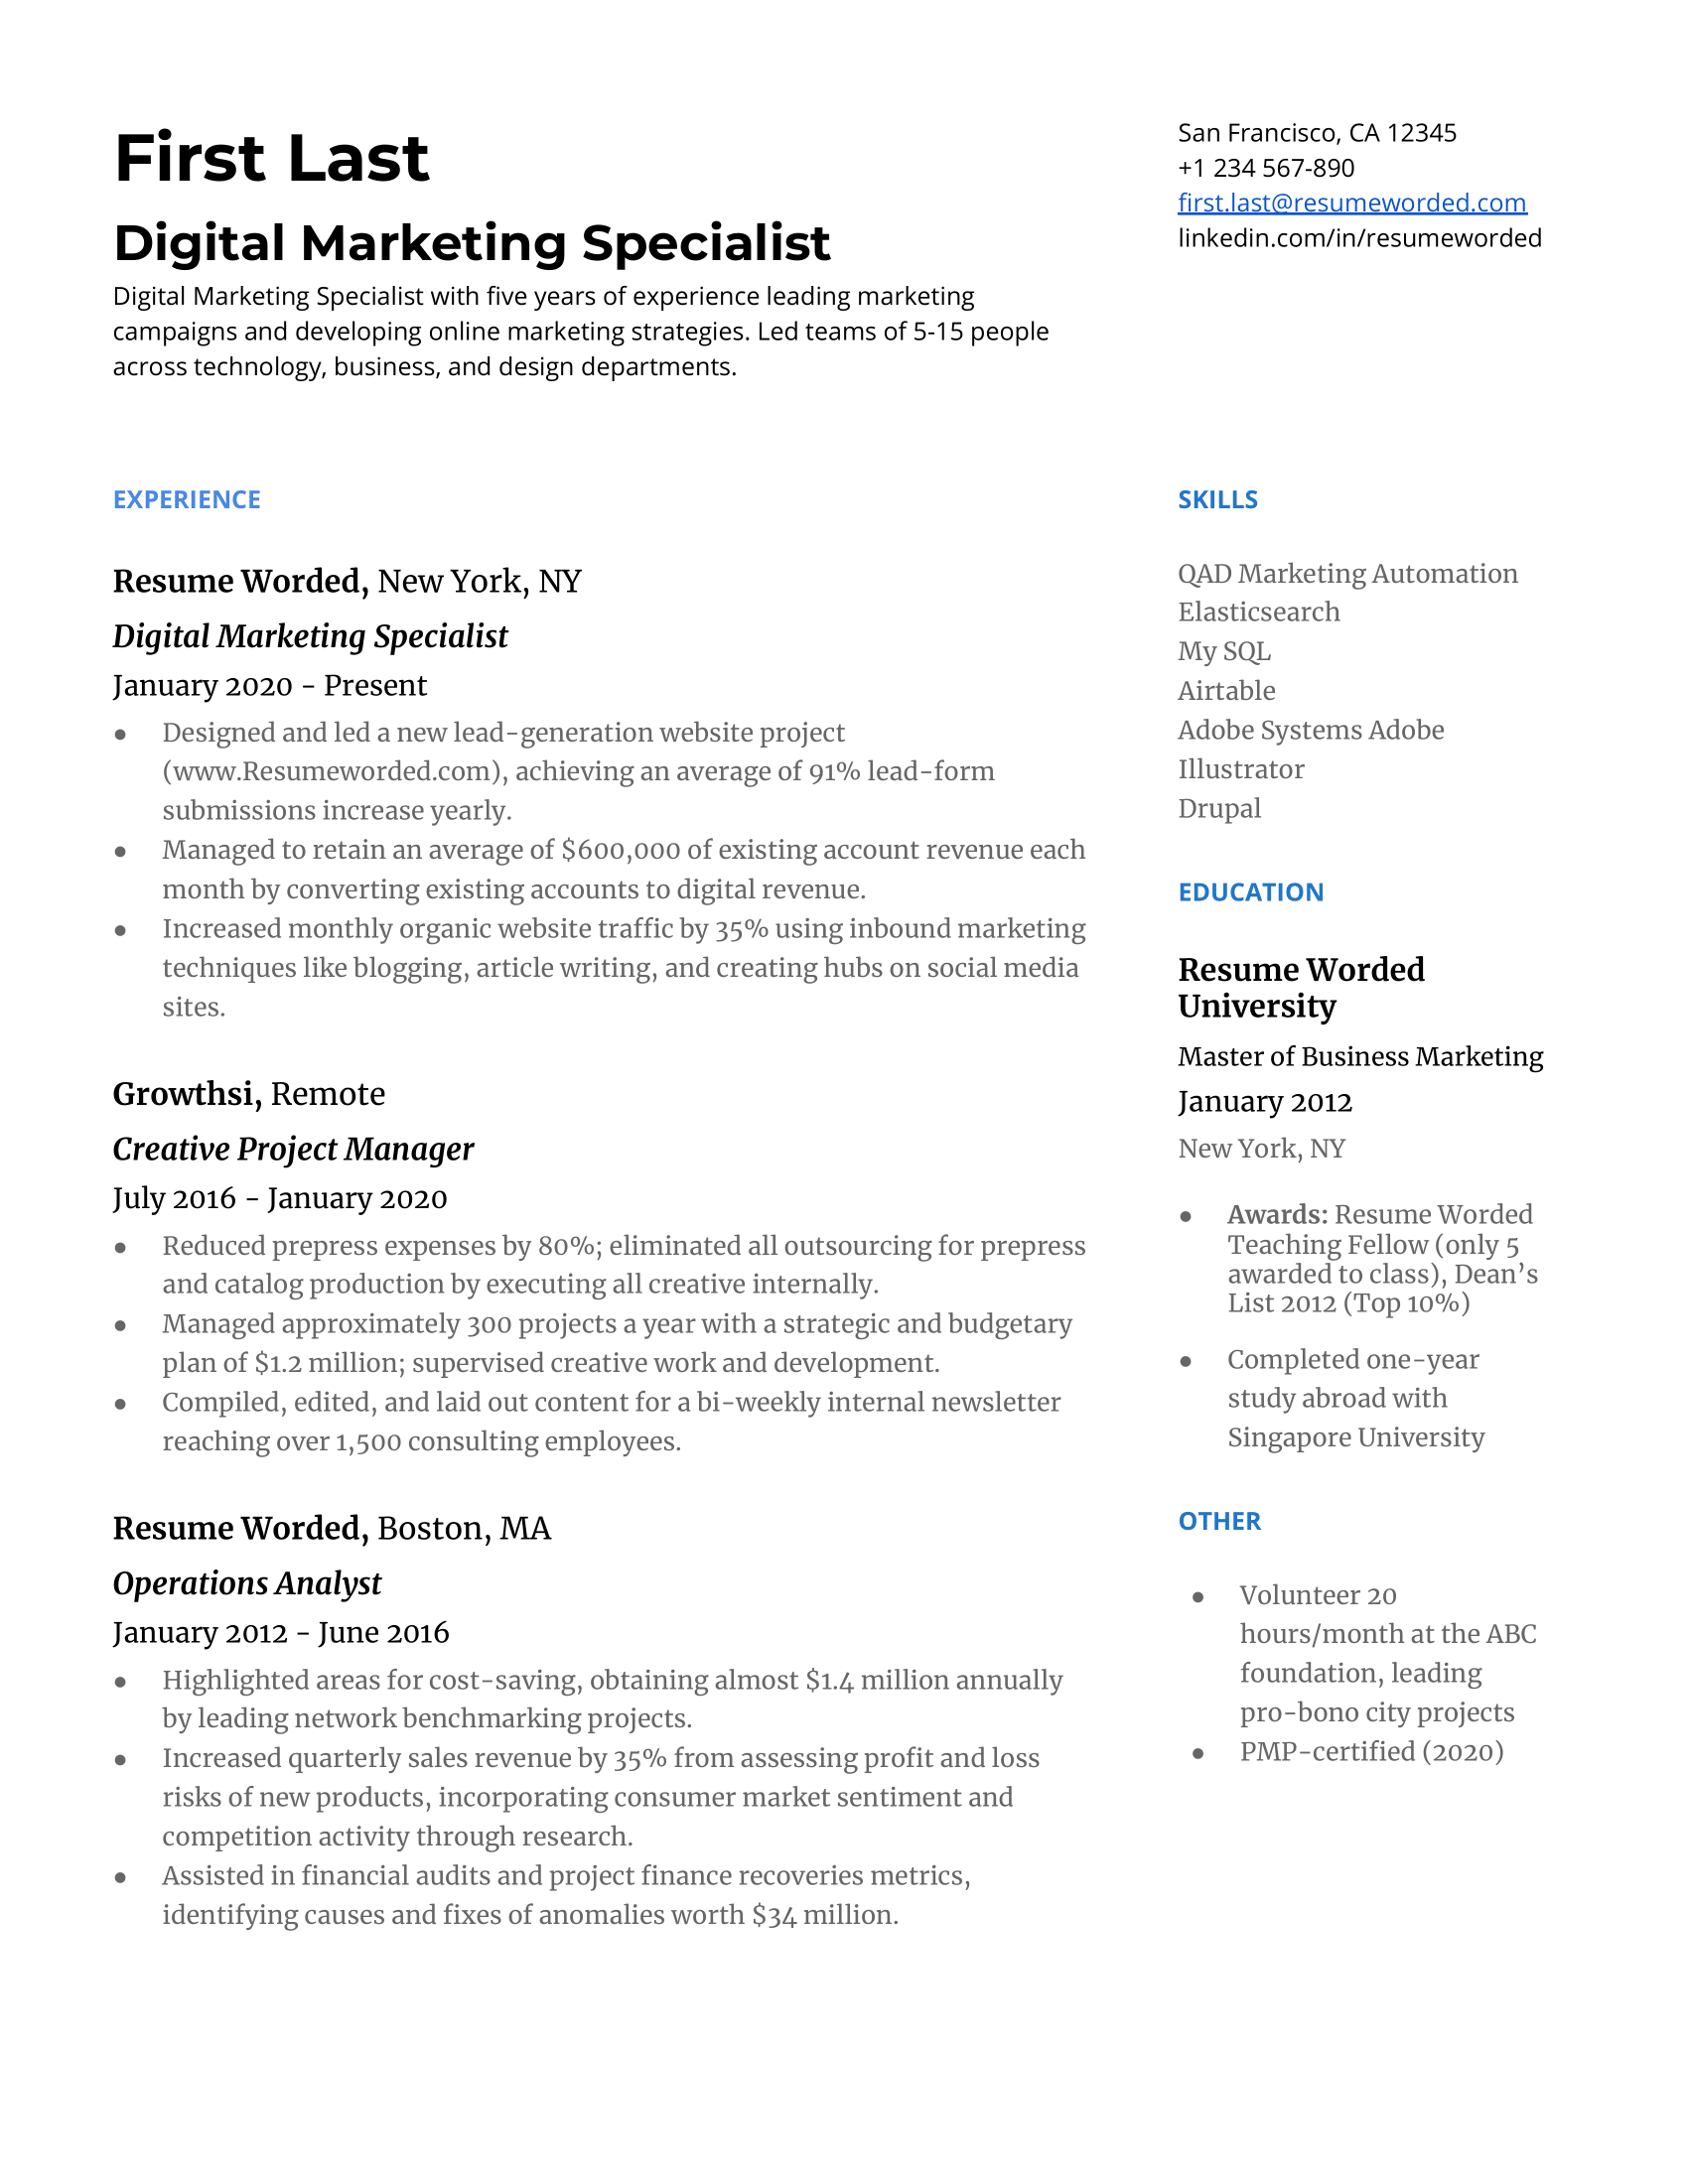 A clean, detailed CV of a digital marketing specialist highlighting their relevant skills and certifications.